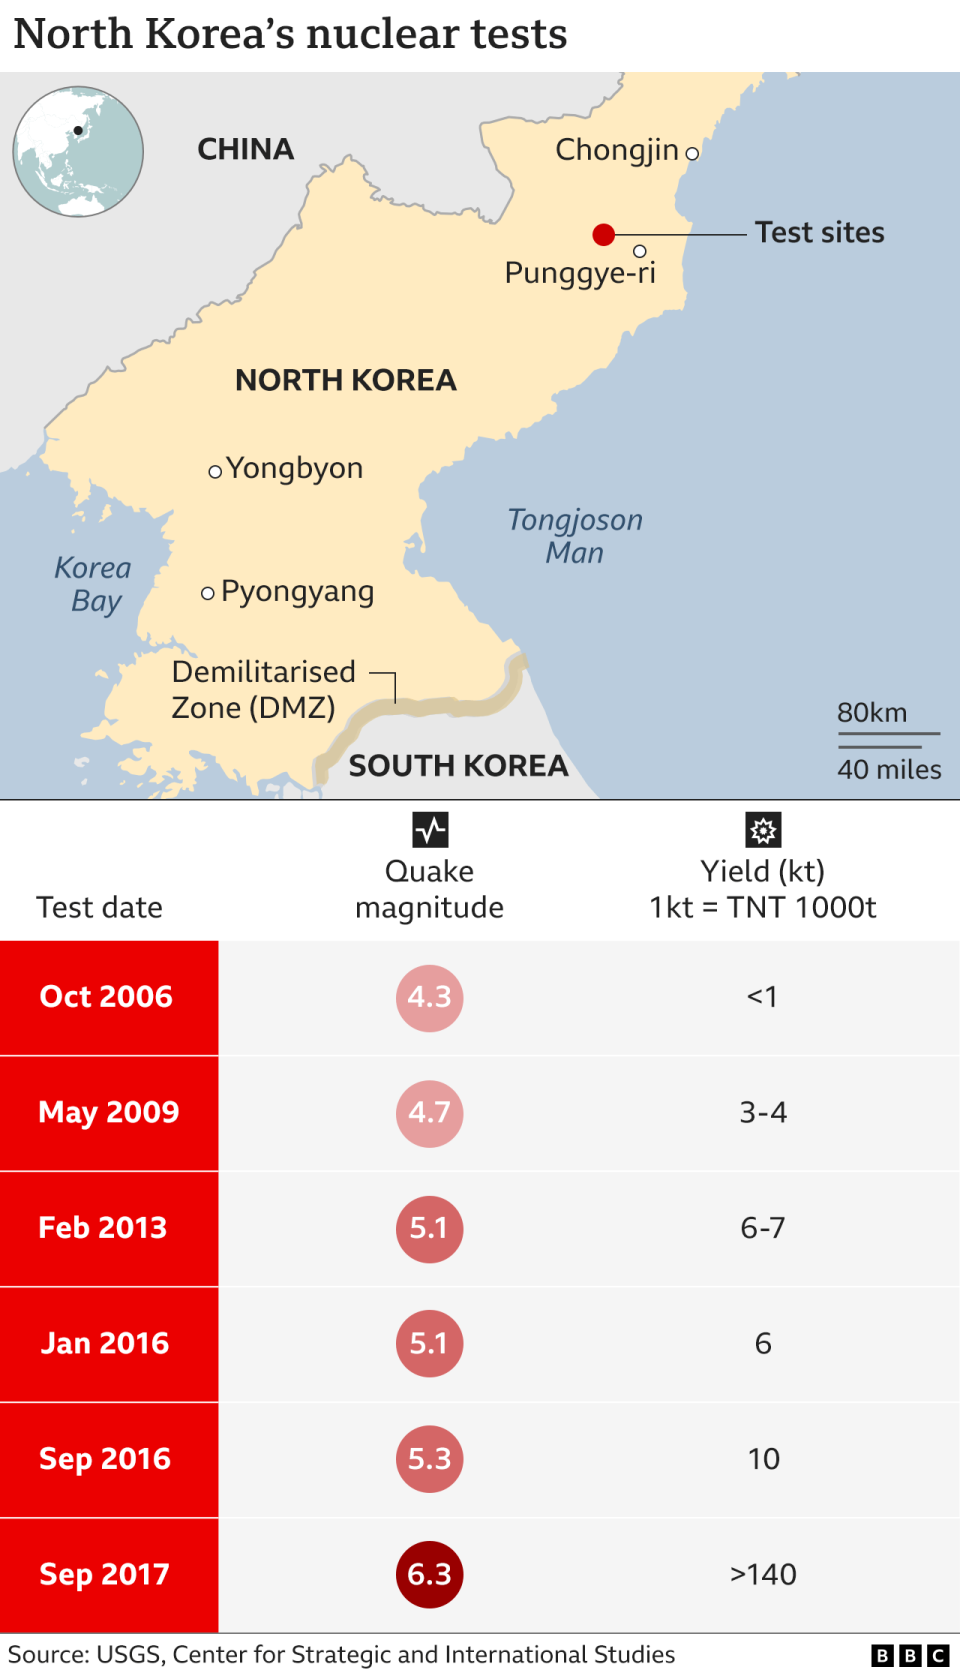 Map showing main nuclear test sites in North Korea and table of tests over time